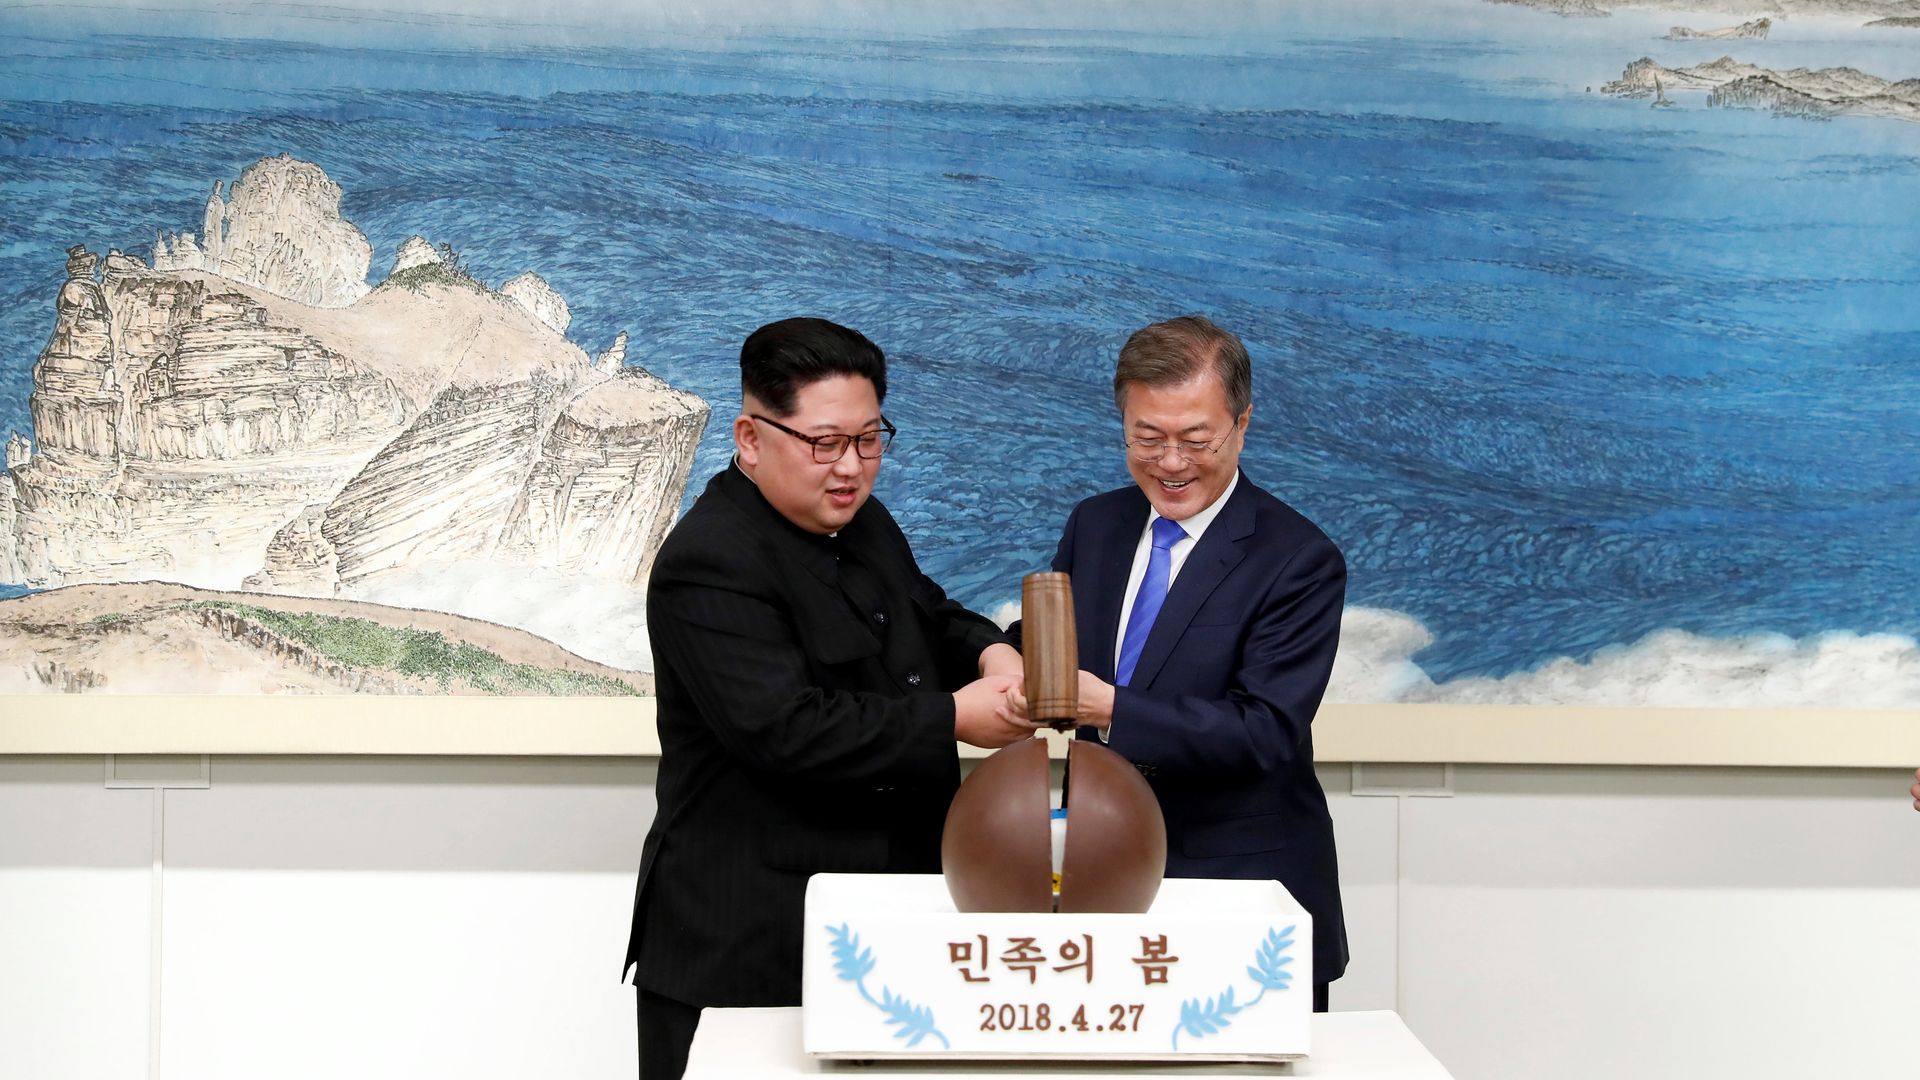 Kim Jong-un and Moon Jae-in take a mallet to a chocolate eggshell dessert